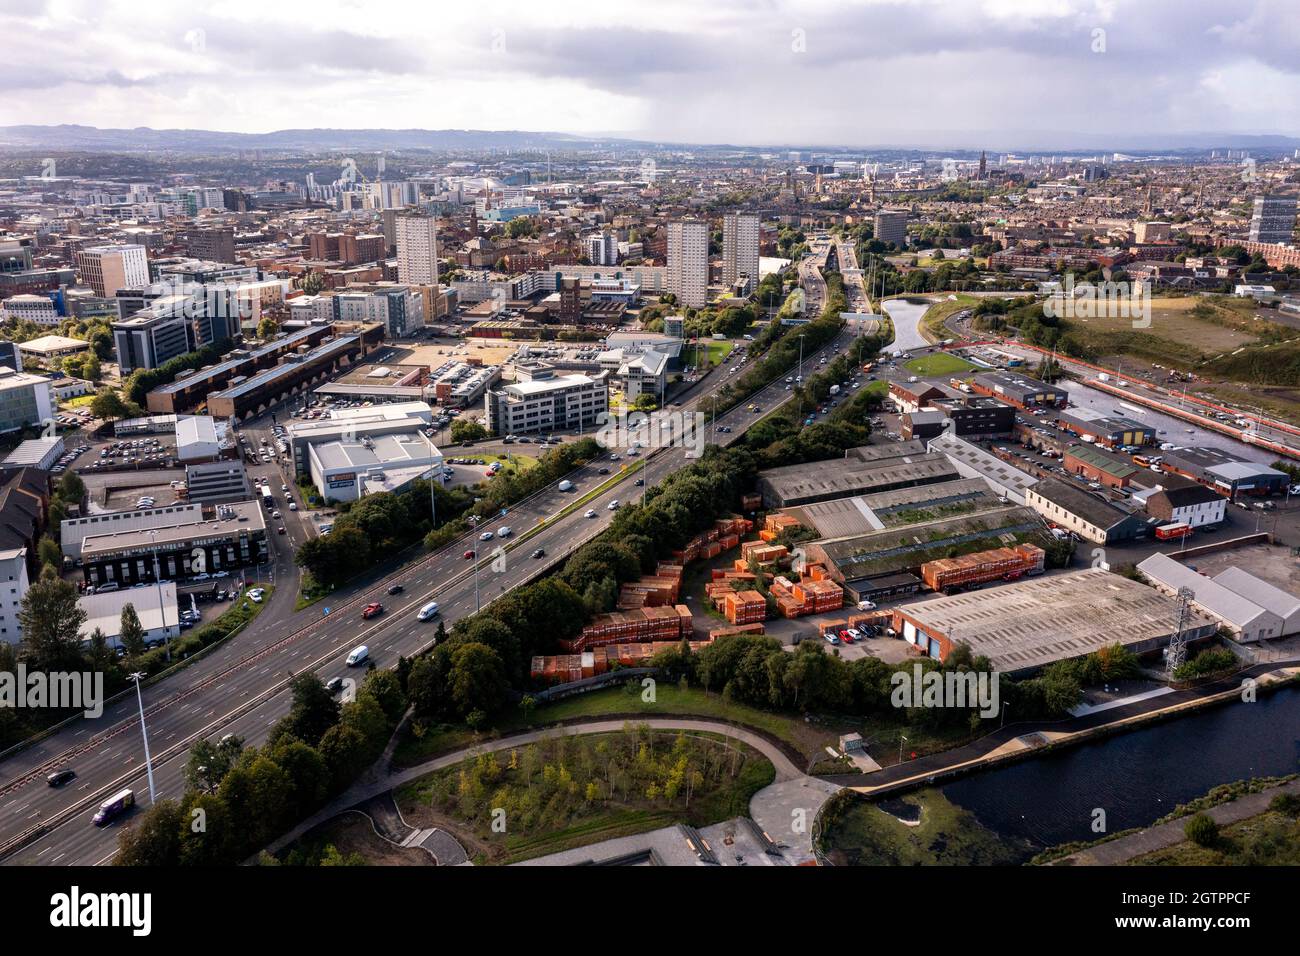 Glasgow, Scotland, UK. 29 September 2021 PICTURED:  Aerial drone view of Glasgow’s Sighthill area showing the new bridge over the M8 Motorway which joins the north of the city centre form the East going through to Charing Cross. The Sighthill area is seeing a capital investment of £250million with new recreational areas and social housing to the north of the city. Also in the area are white water rafting and kayaking training centres along with wakeboarding training facilities. Credit: Colin Fisher Stock Photo